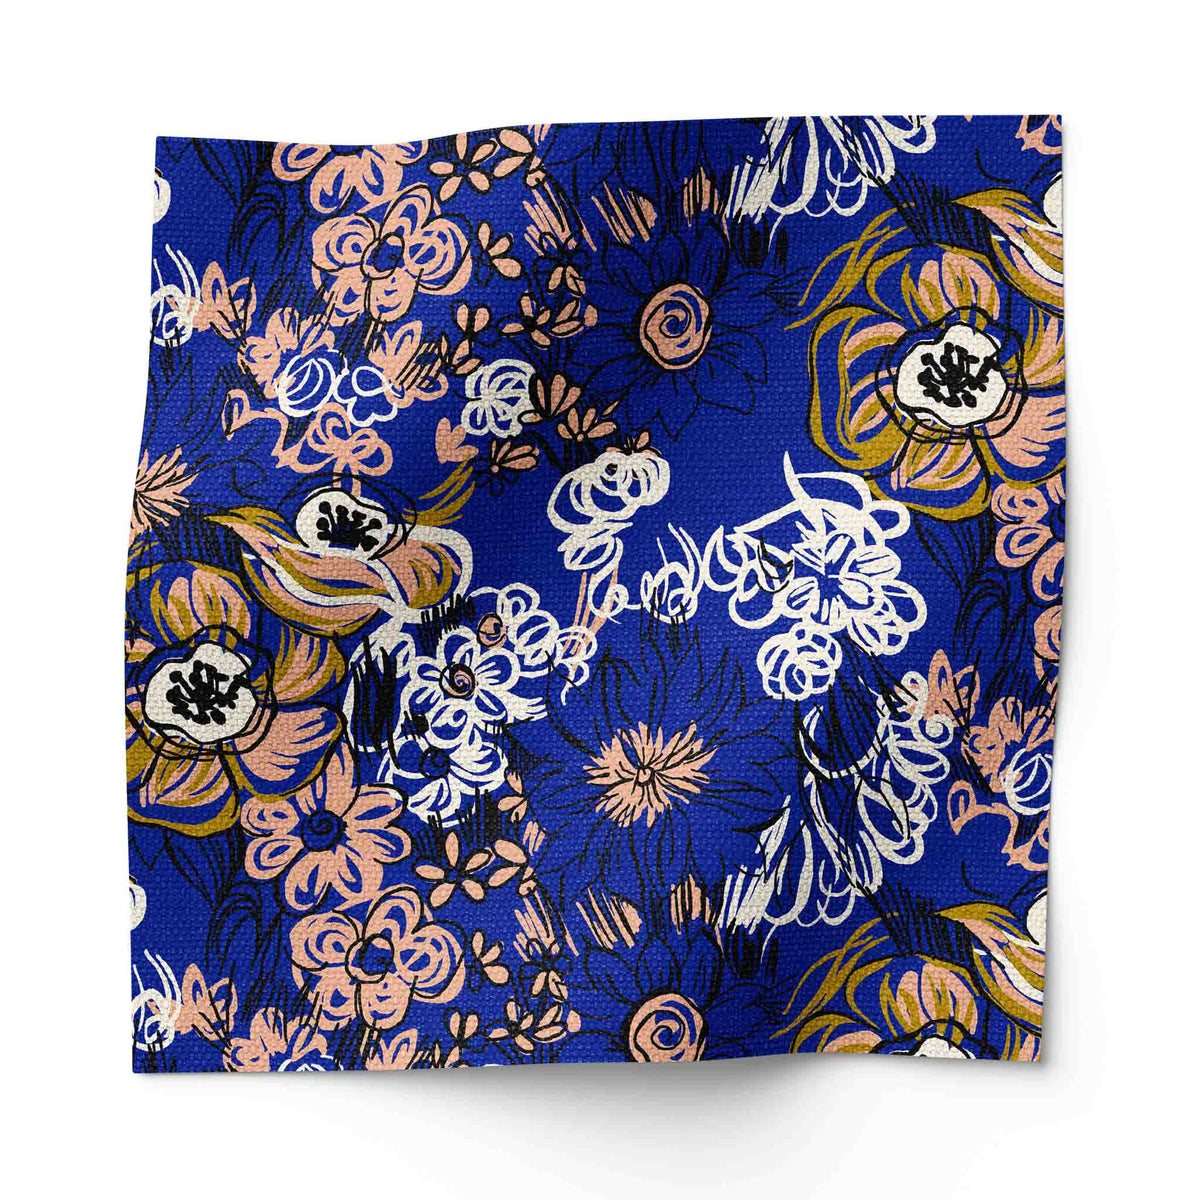 Windy Floral Fabric